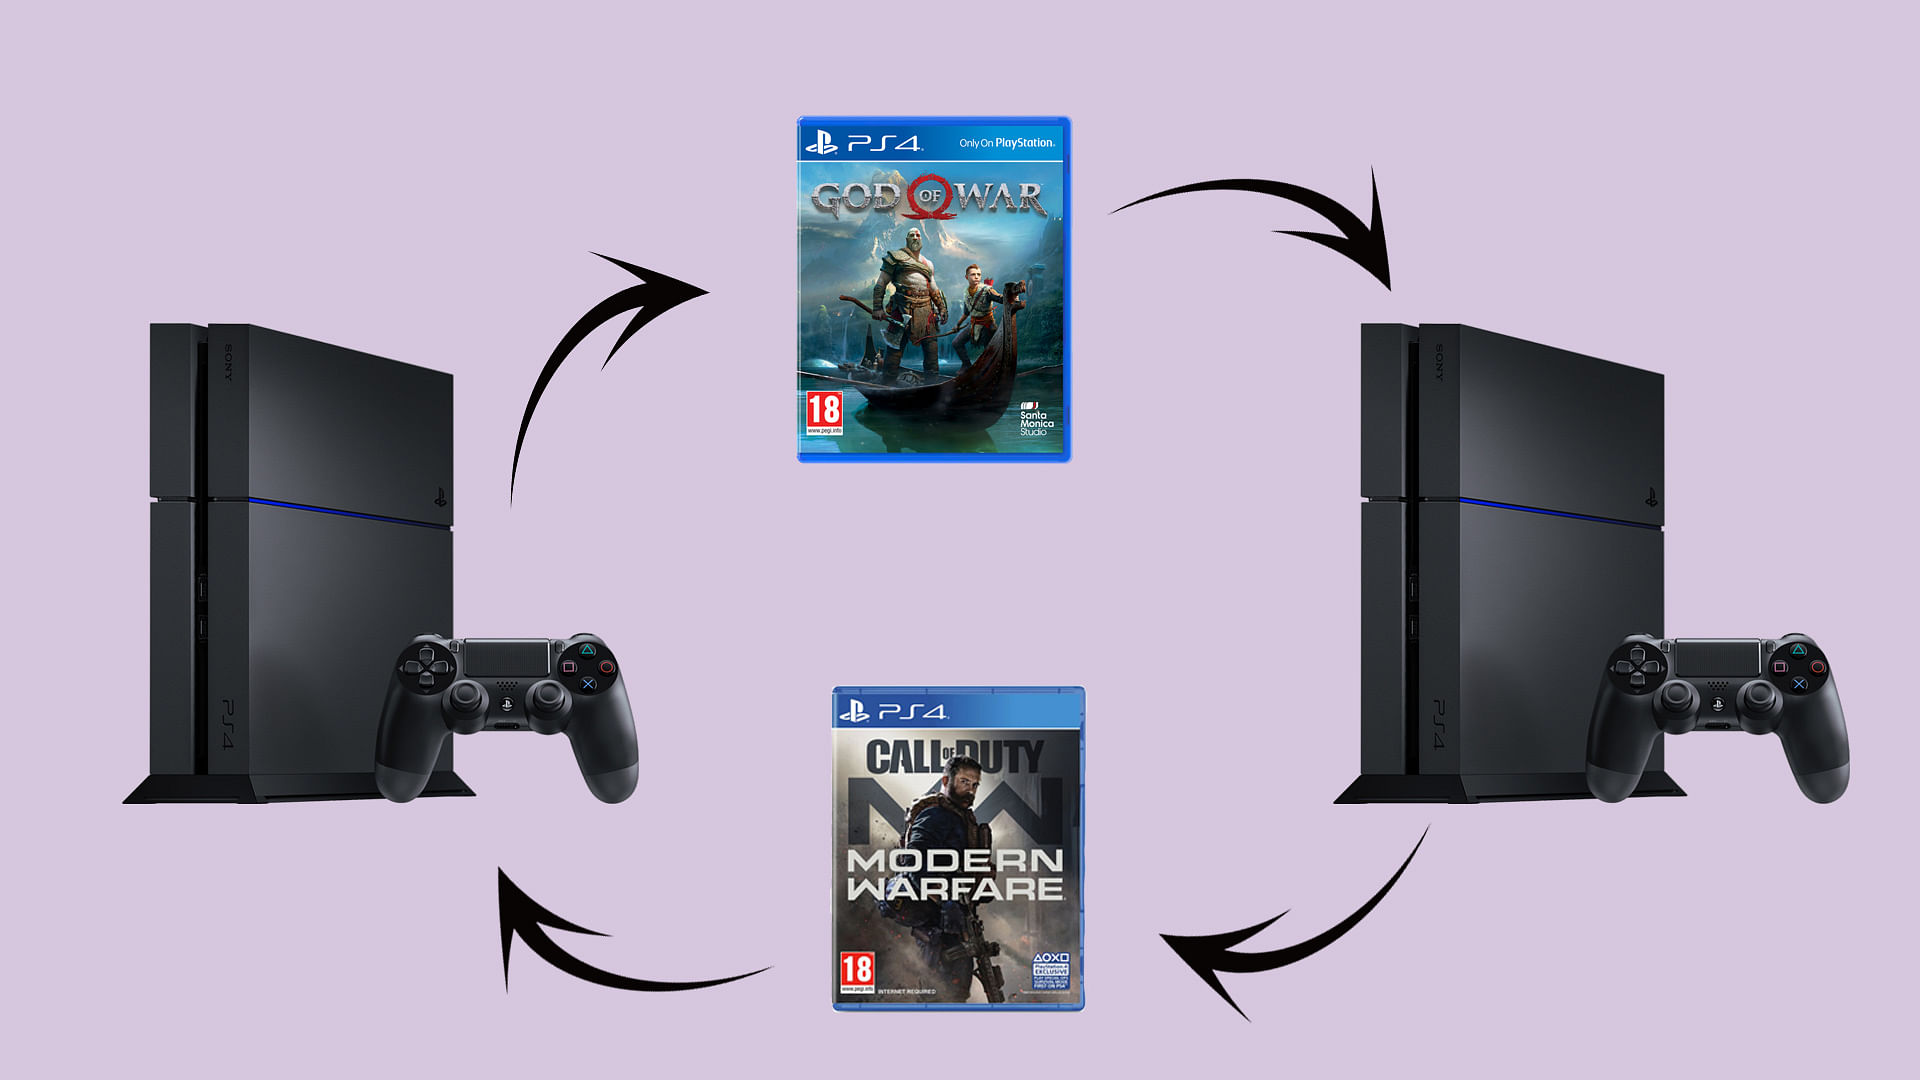 How to Add Friends on Your PS4 in 6 Simple Steps